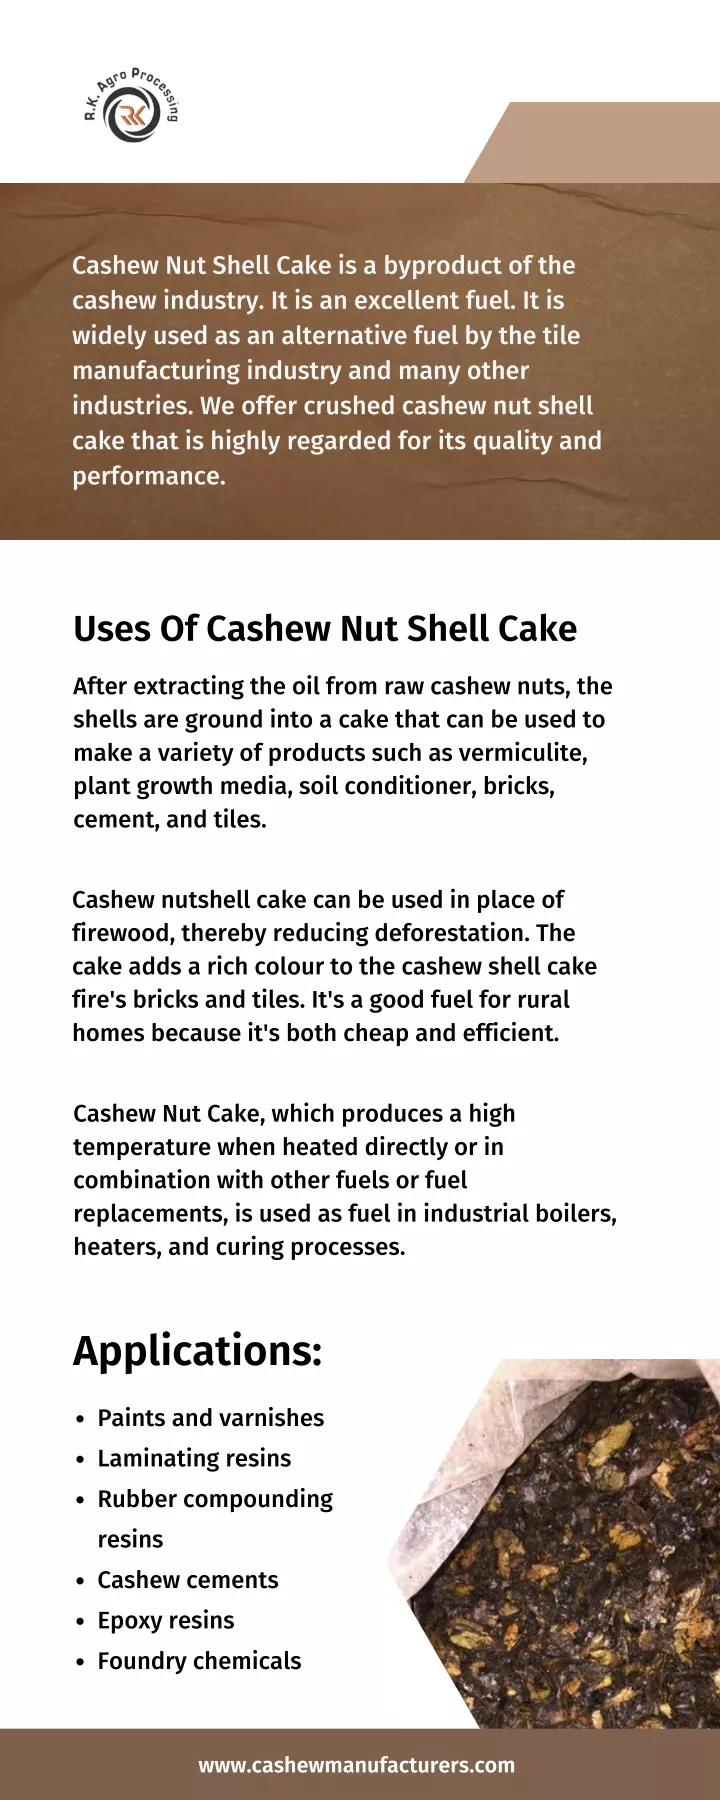 Cashew Manufacturers on X: 